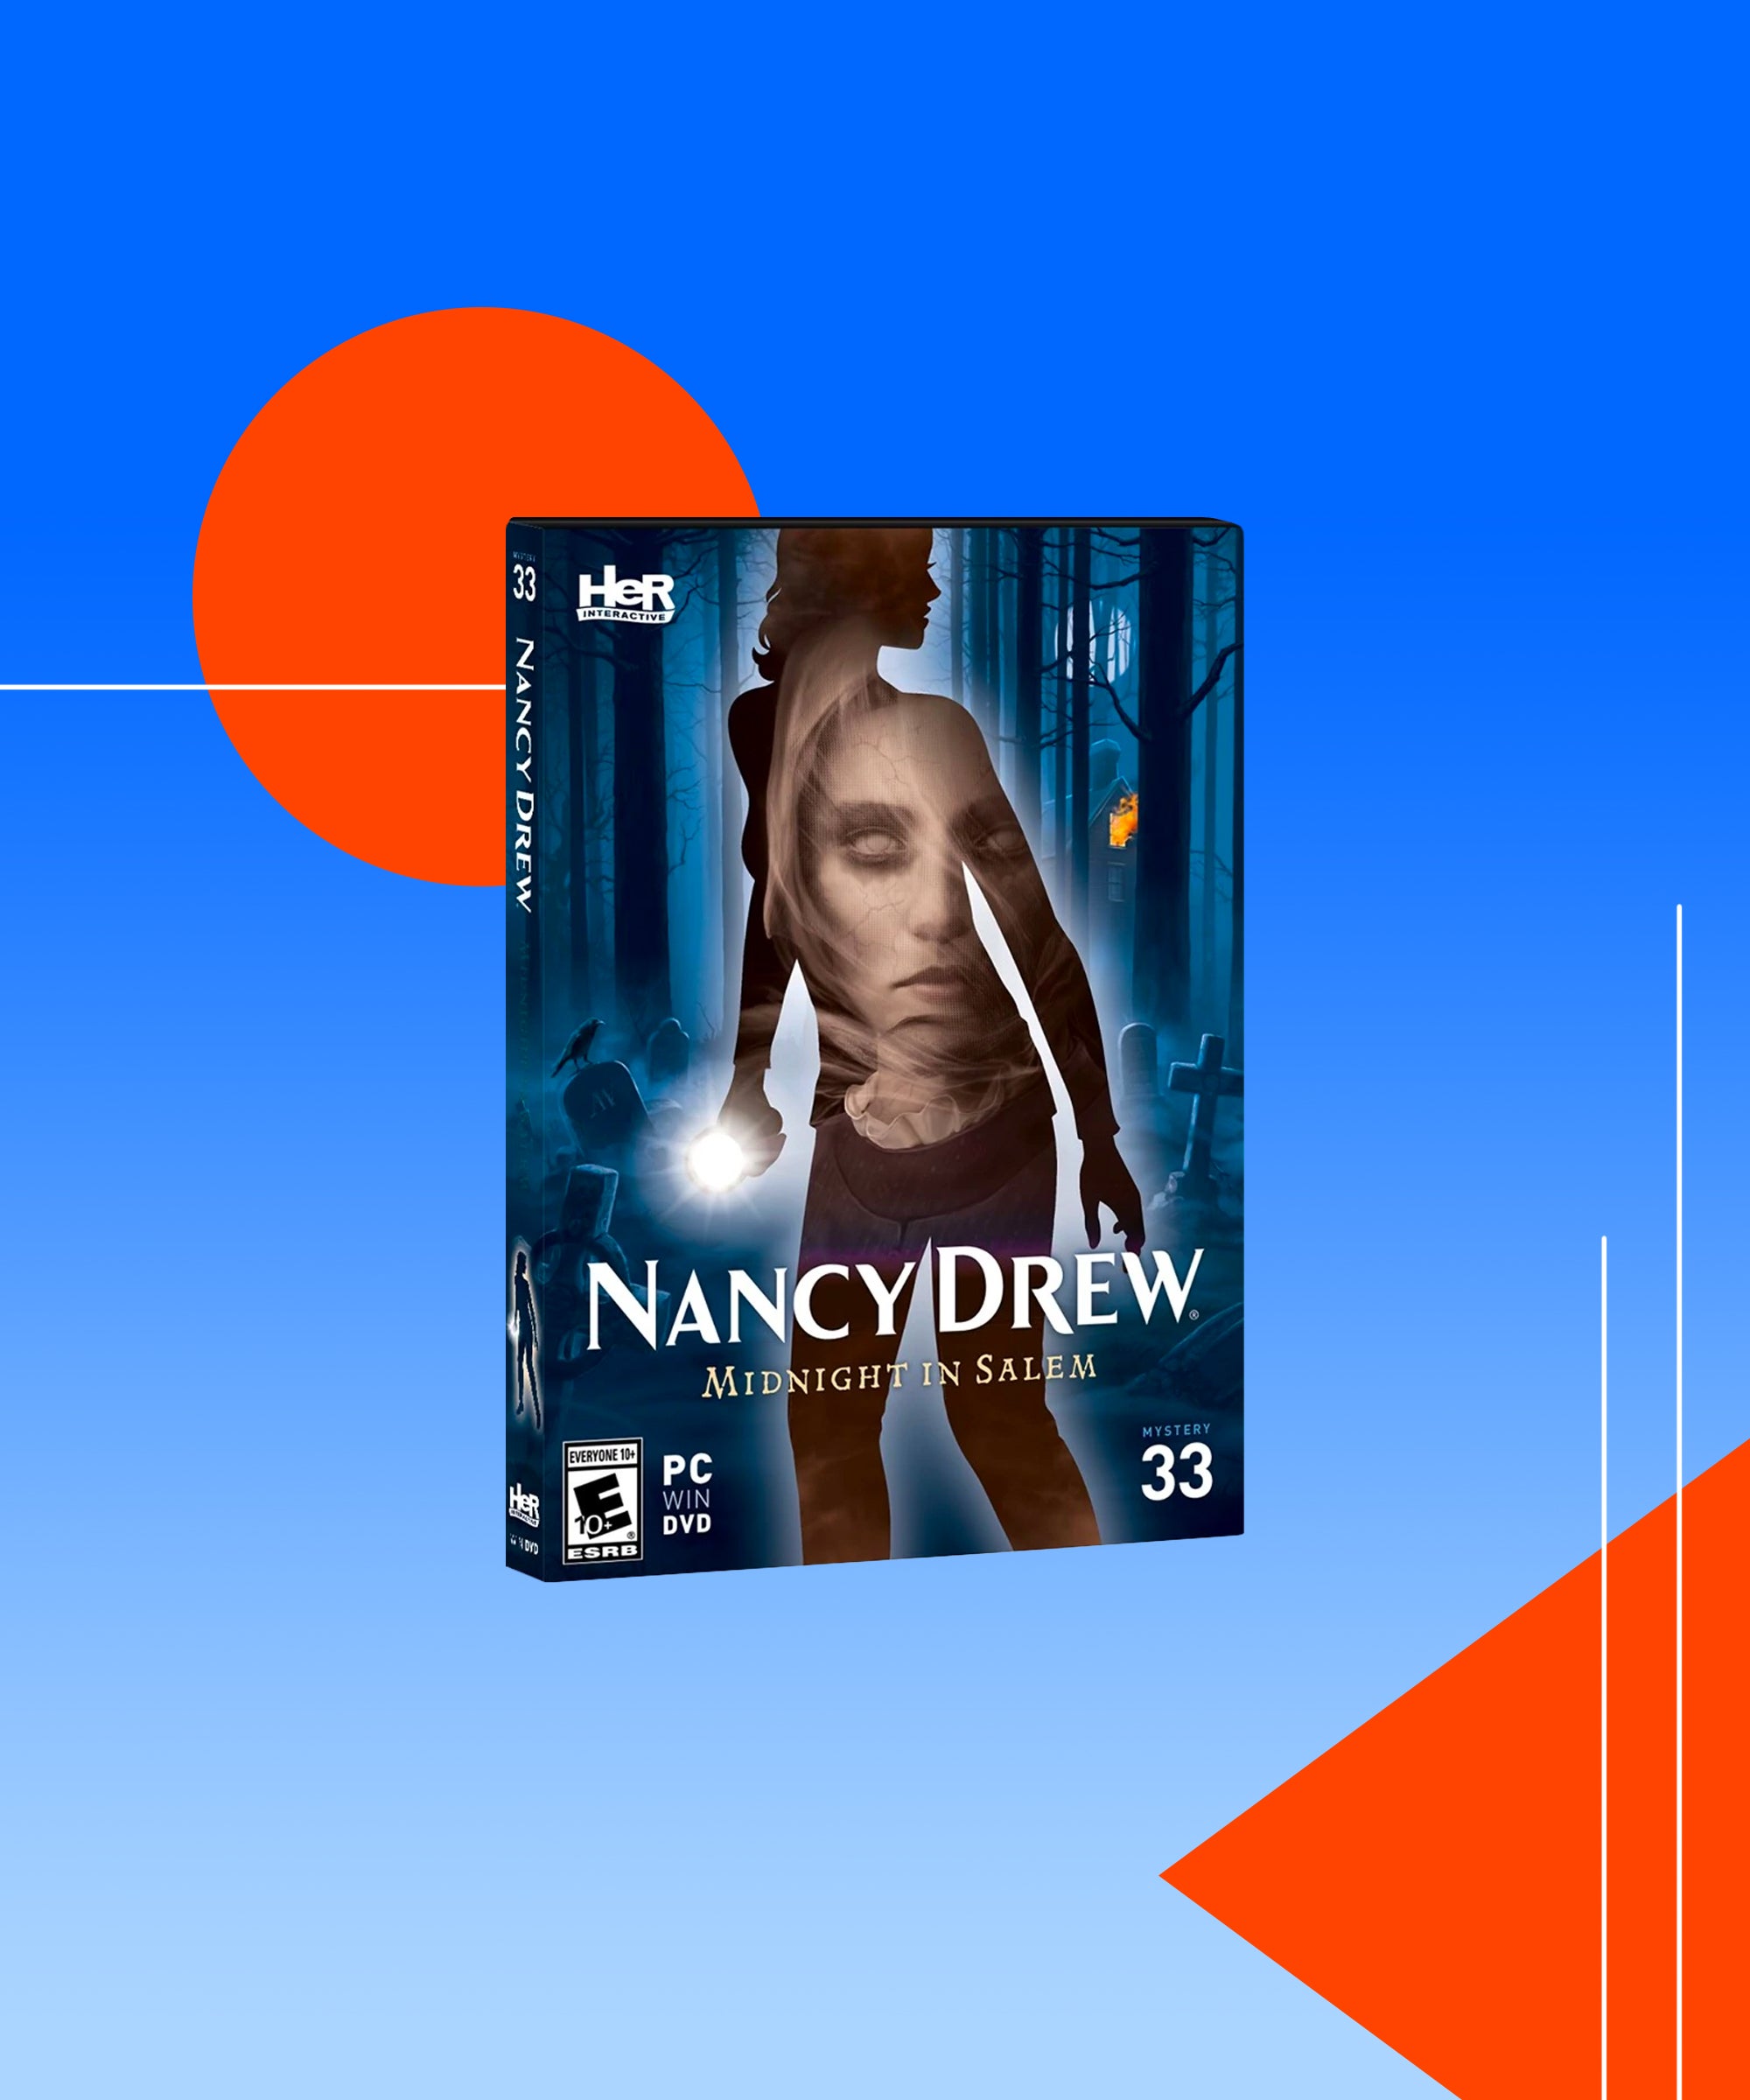 how to play nancy drew games on a man